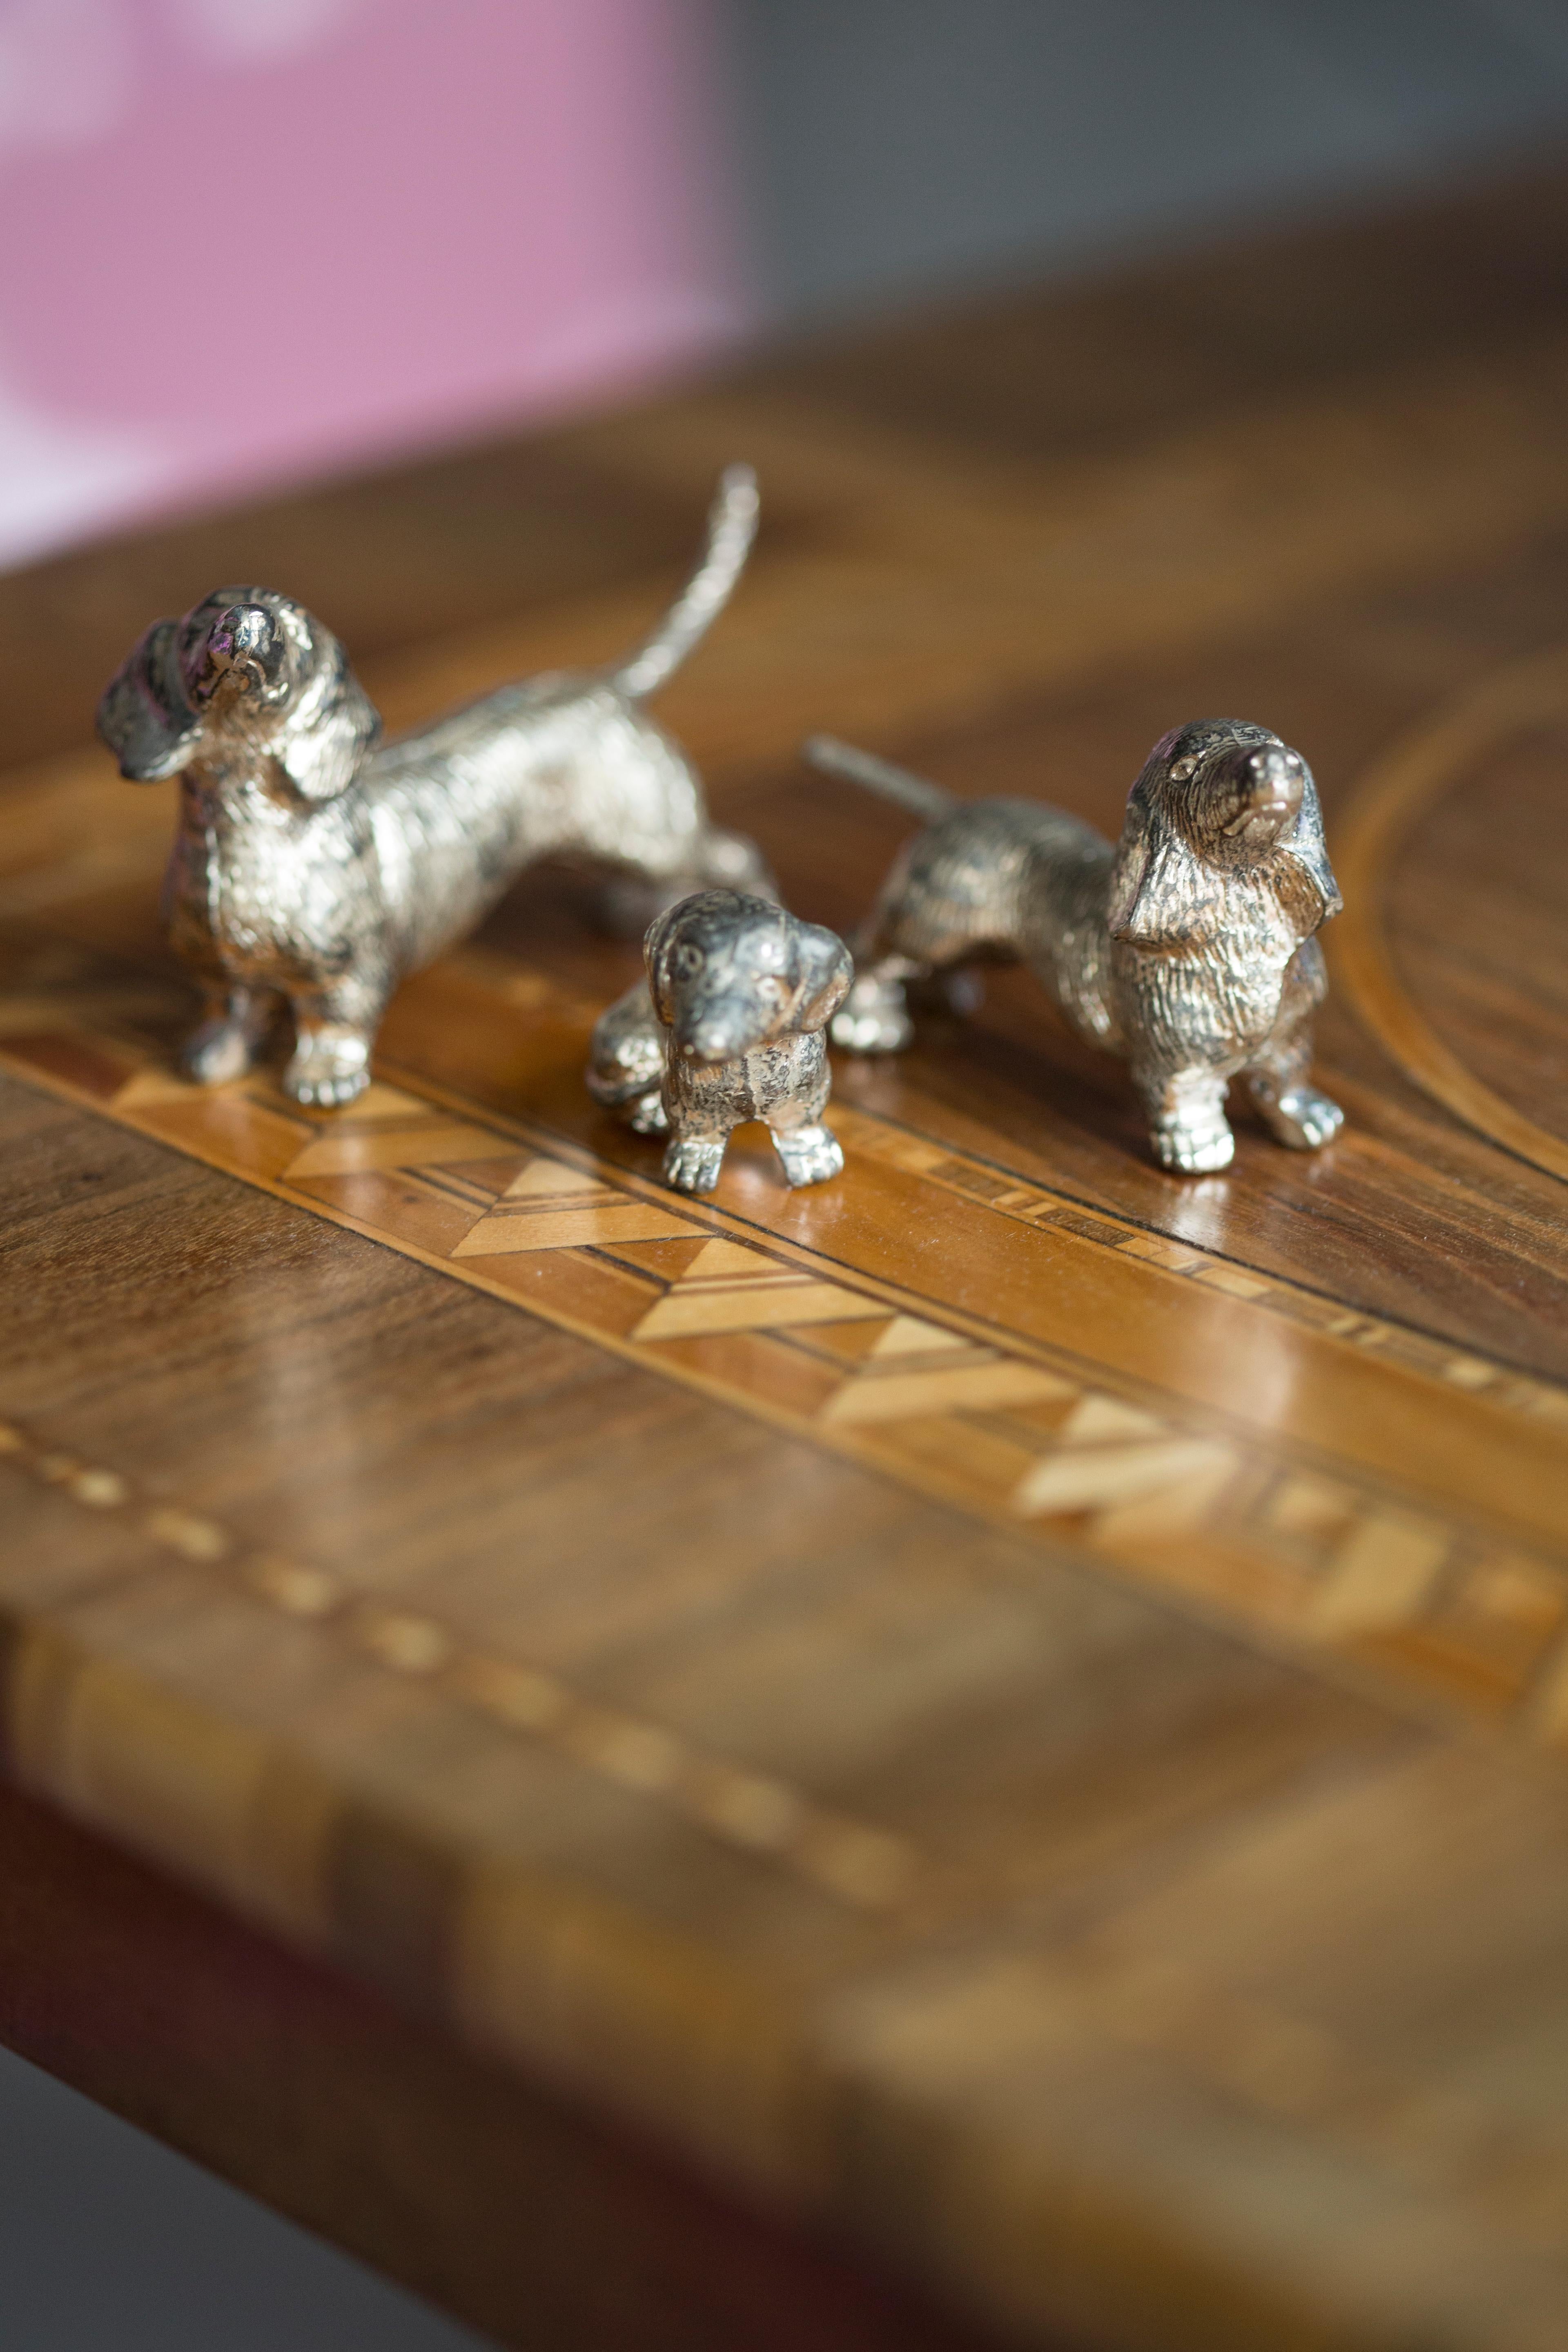 Italian metal sculptures, original very good vintage condition. 

Super small and cute items.
Sizes: 
Small: 4 x 2 x 2 cm
Medium: 6 x 2 x 3 cm
Big: 7 x 2 x 4 cm

The dogs were produced in 1950s in Italy.